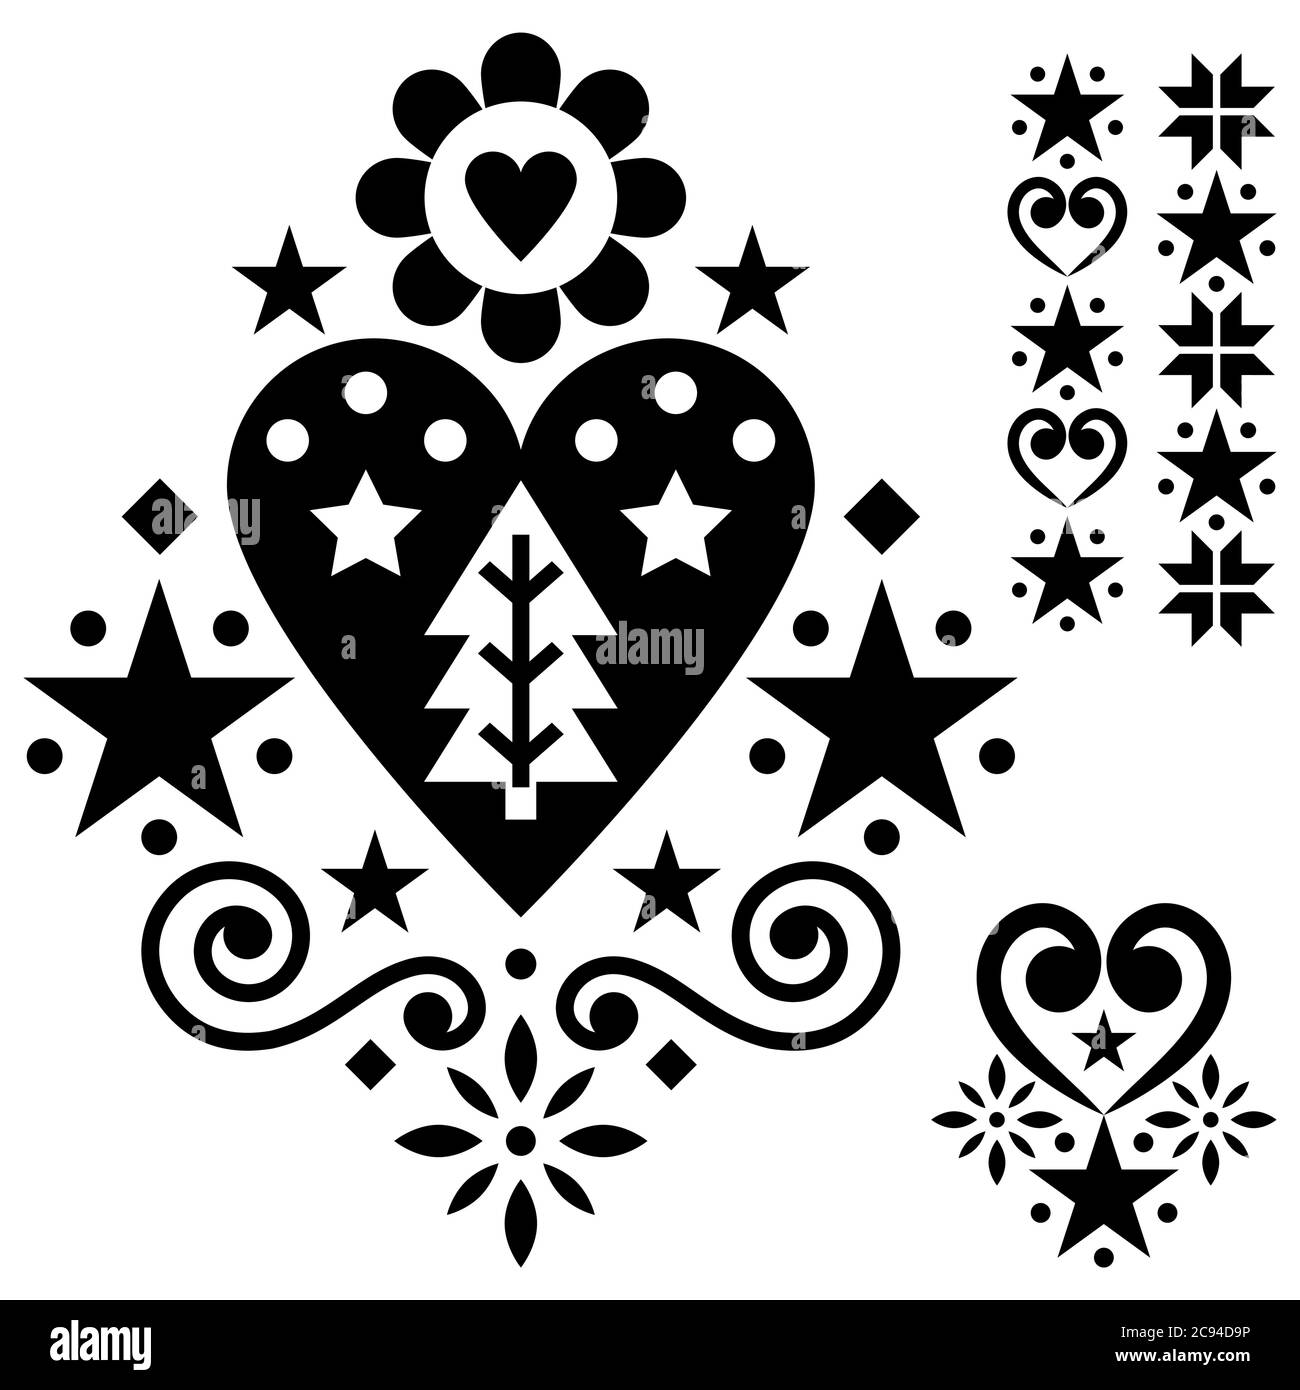 Christmas Scandinavian folk art vector design set - single monochrome patterns collection with hearts, flowers, snowflakes and Christmas trees Stock Vector